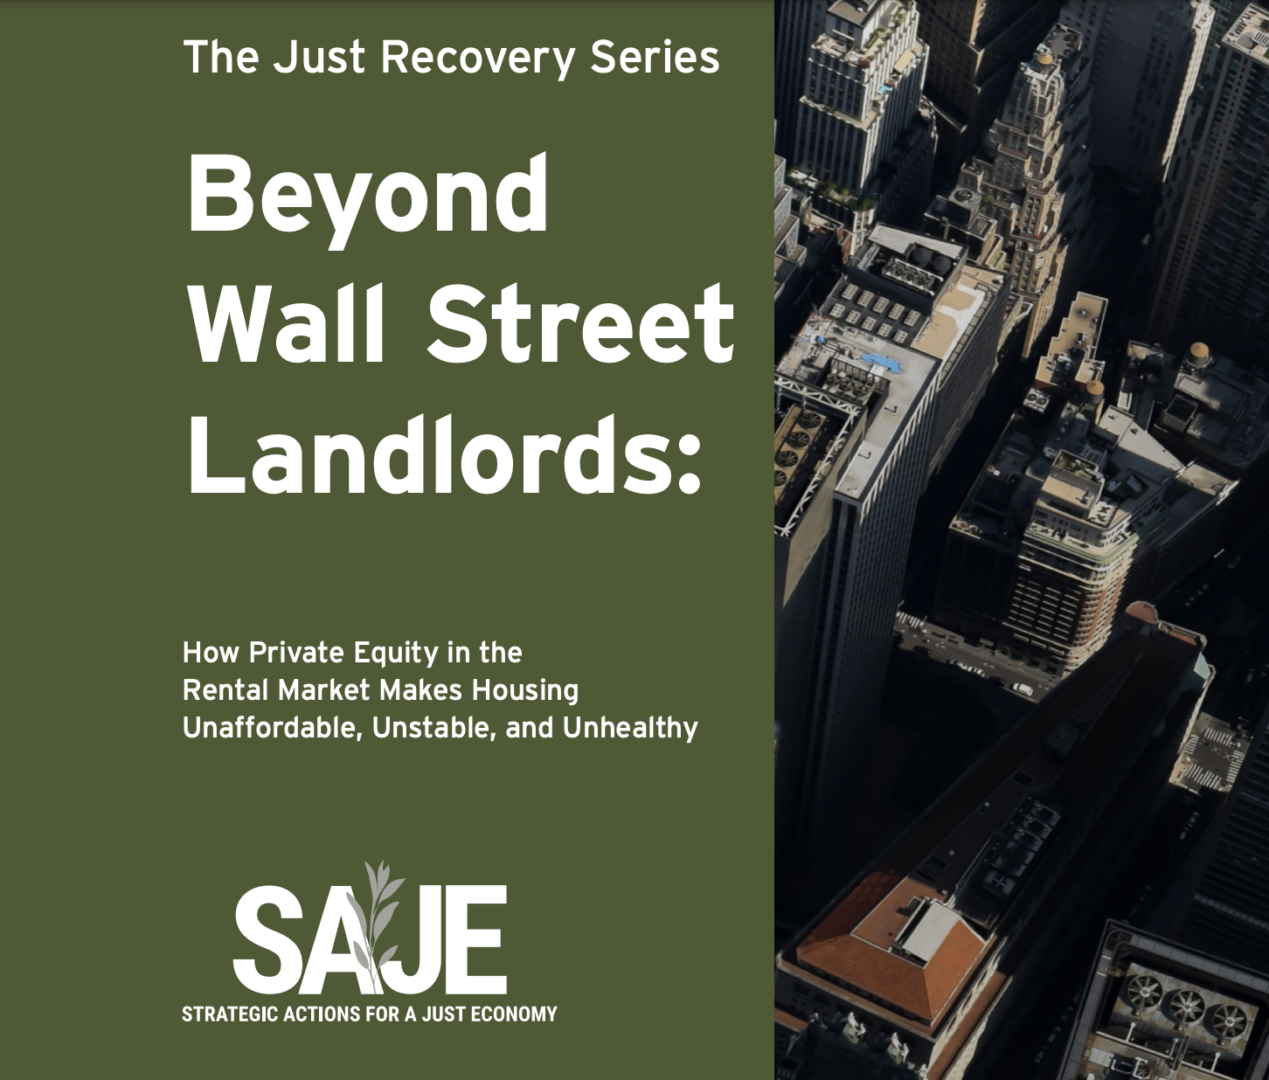 The Just Recovery Series: Beyond Wall Street Landlords